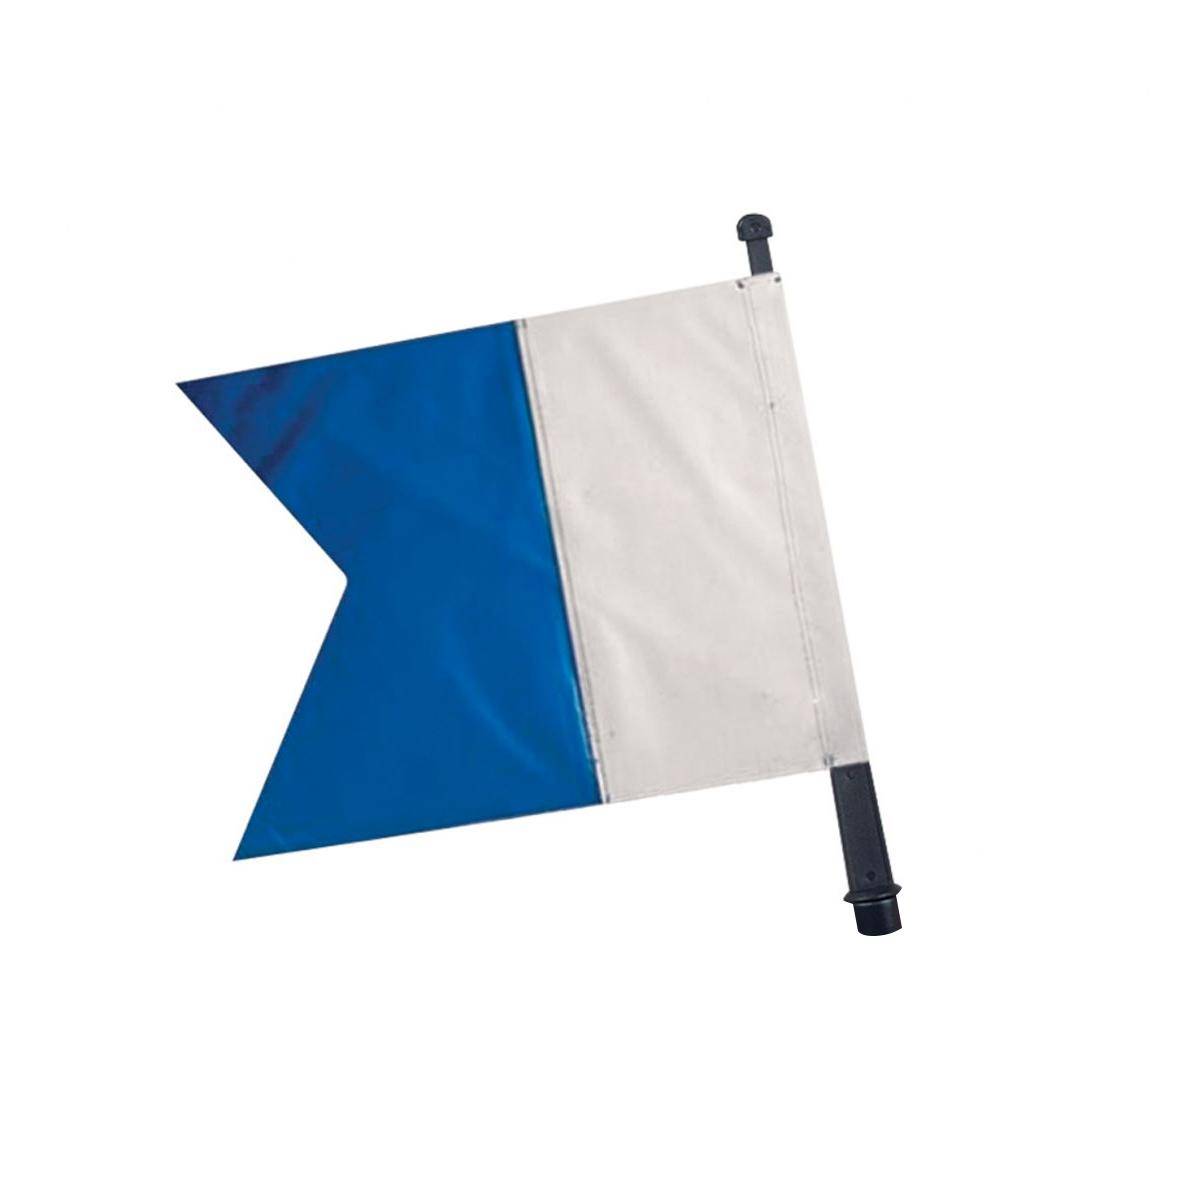 Salvimar diving flag A for freediving buoy